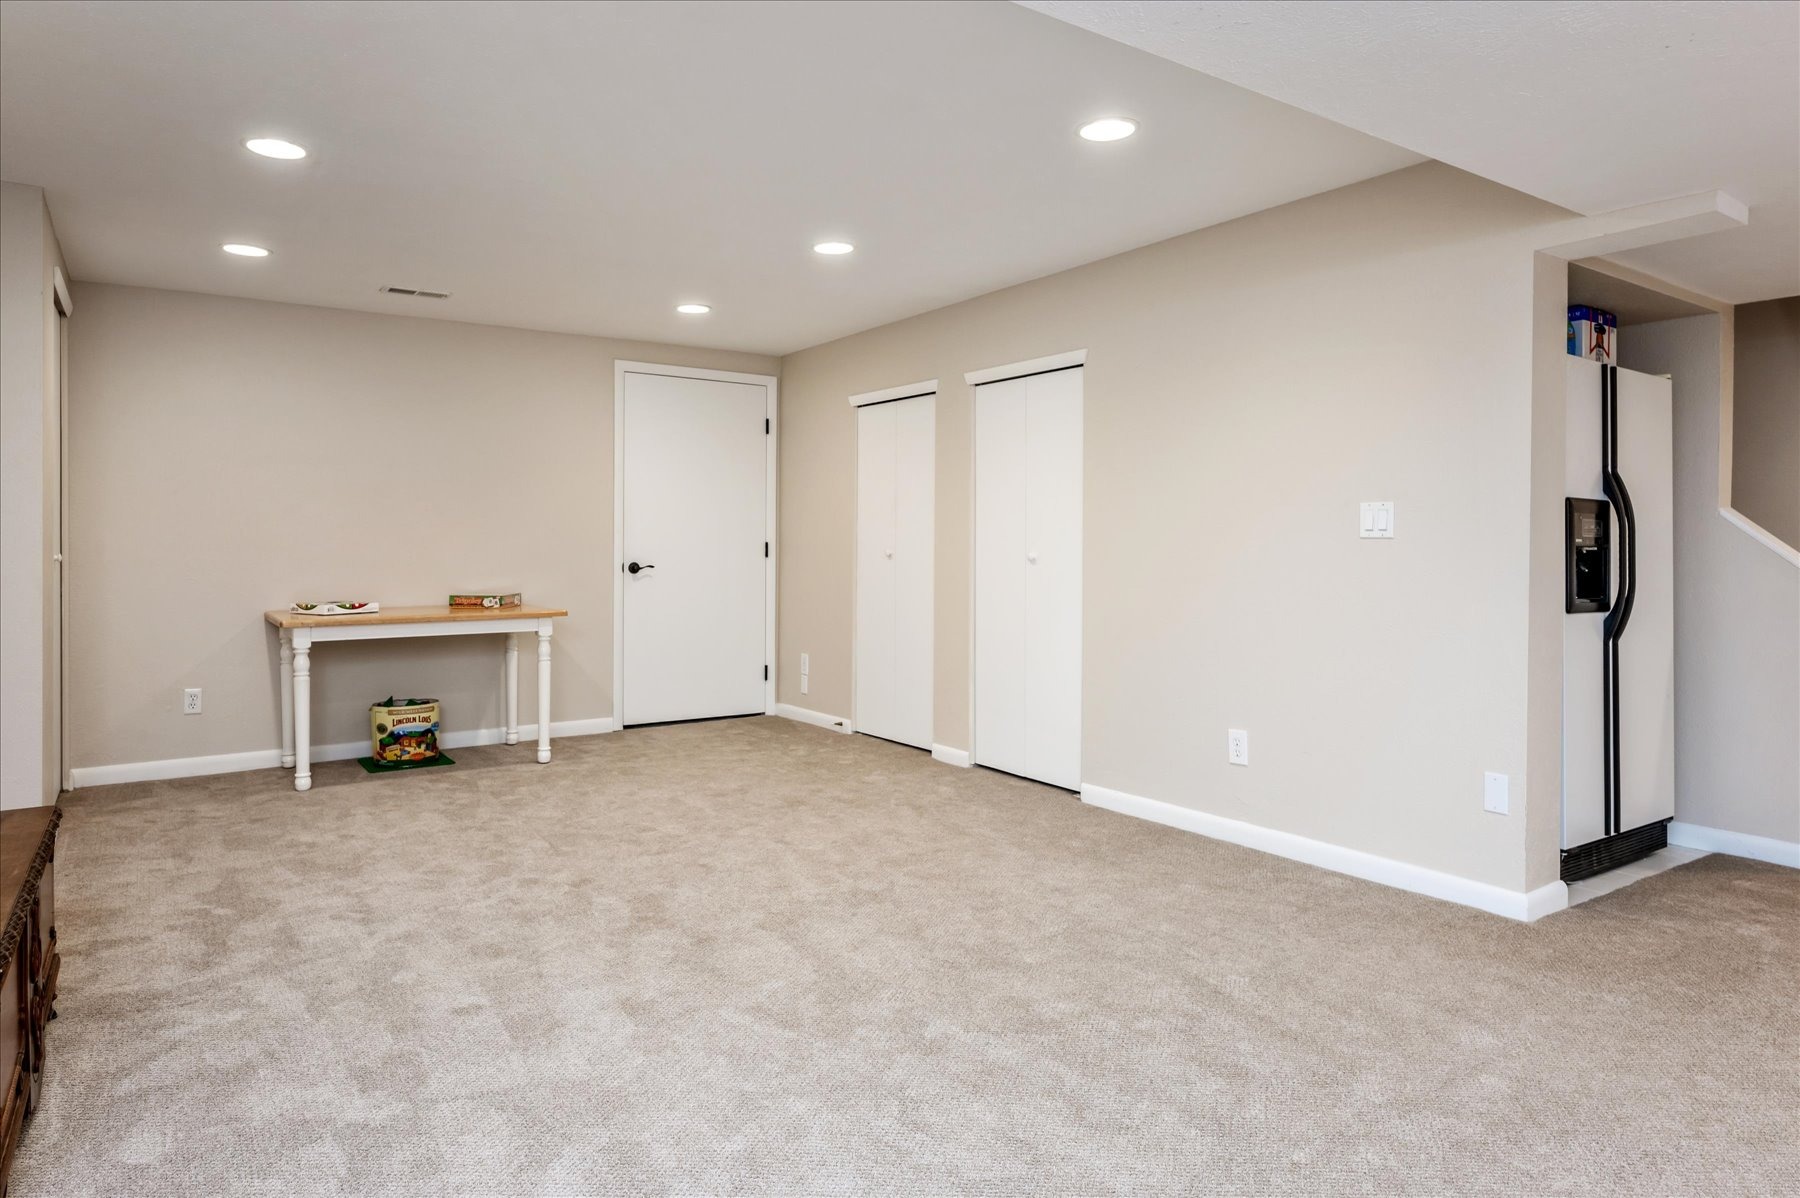 Walk-in Storage Closets in Basement Family Room